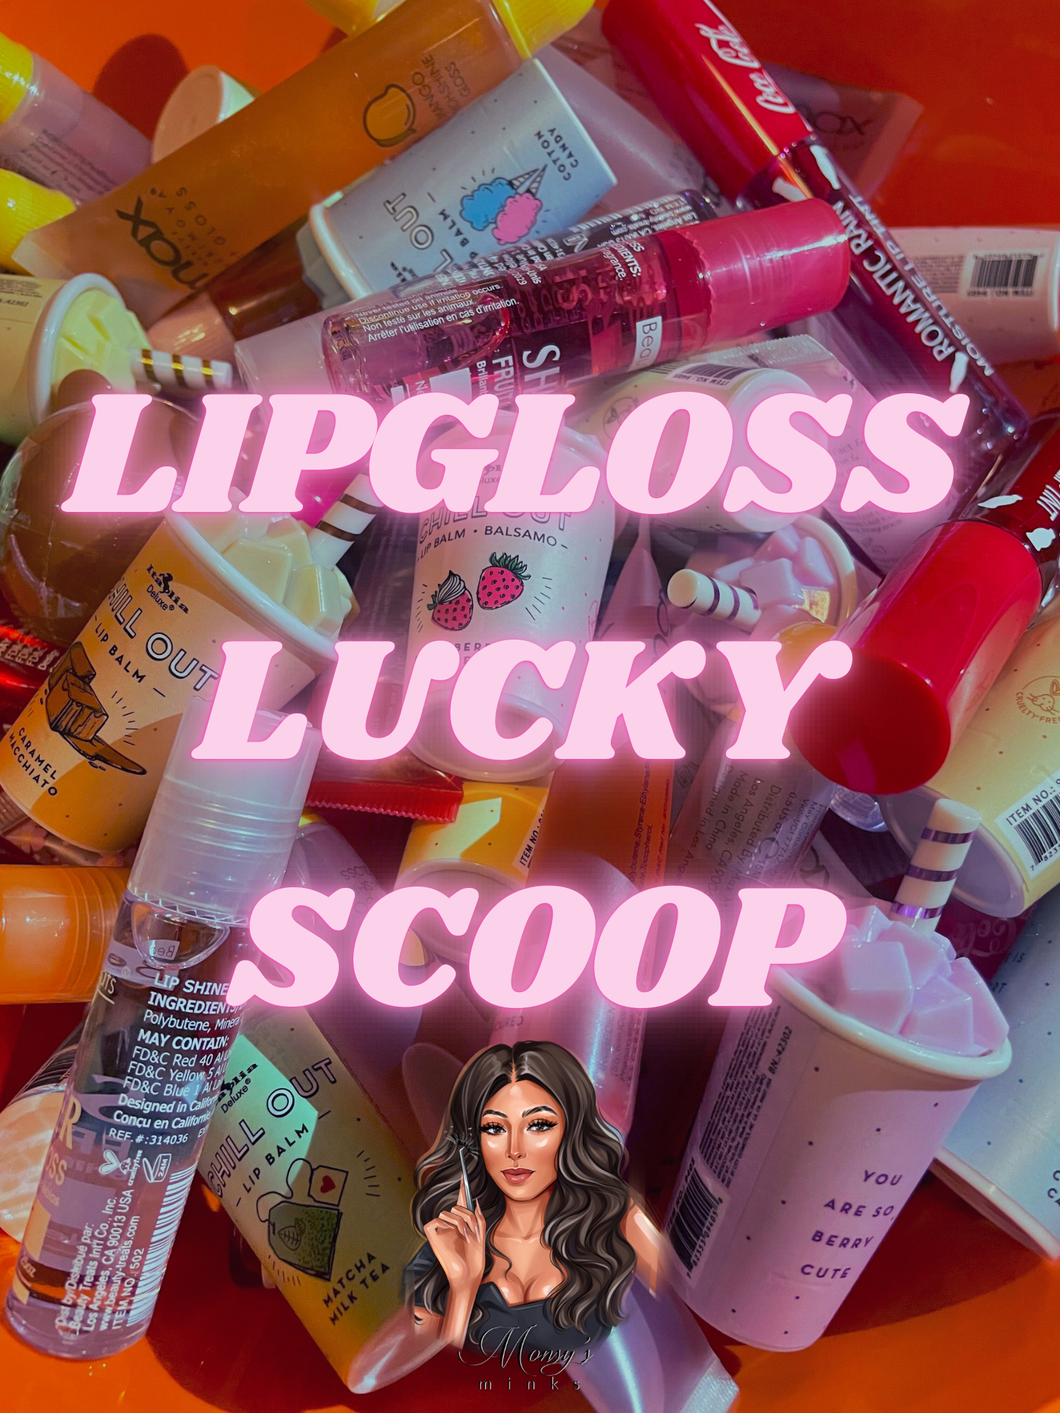 LIPGLOSS LUCKY SCOOP